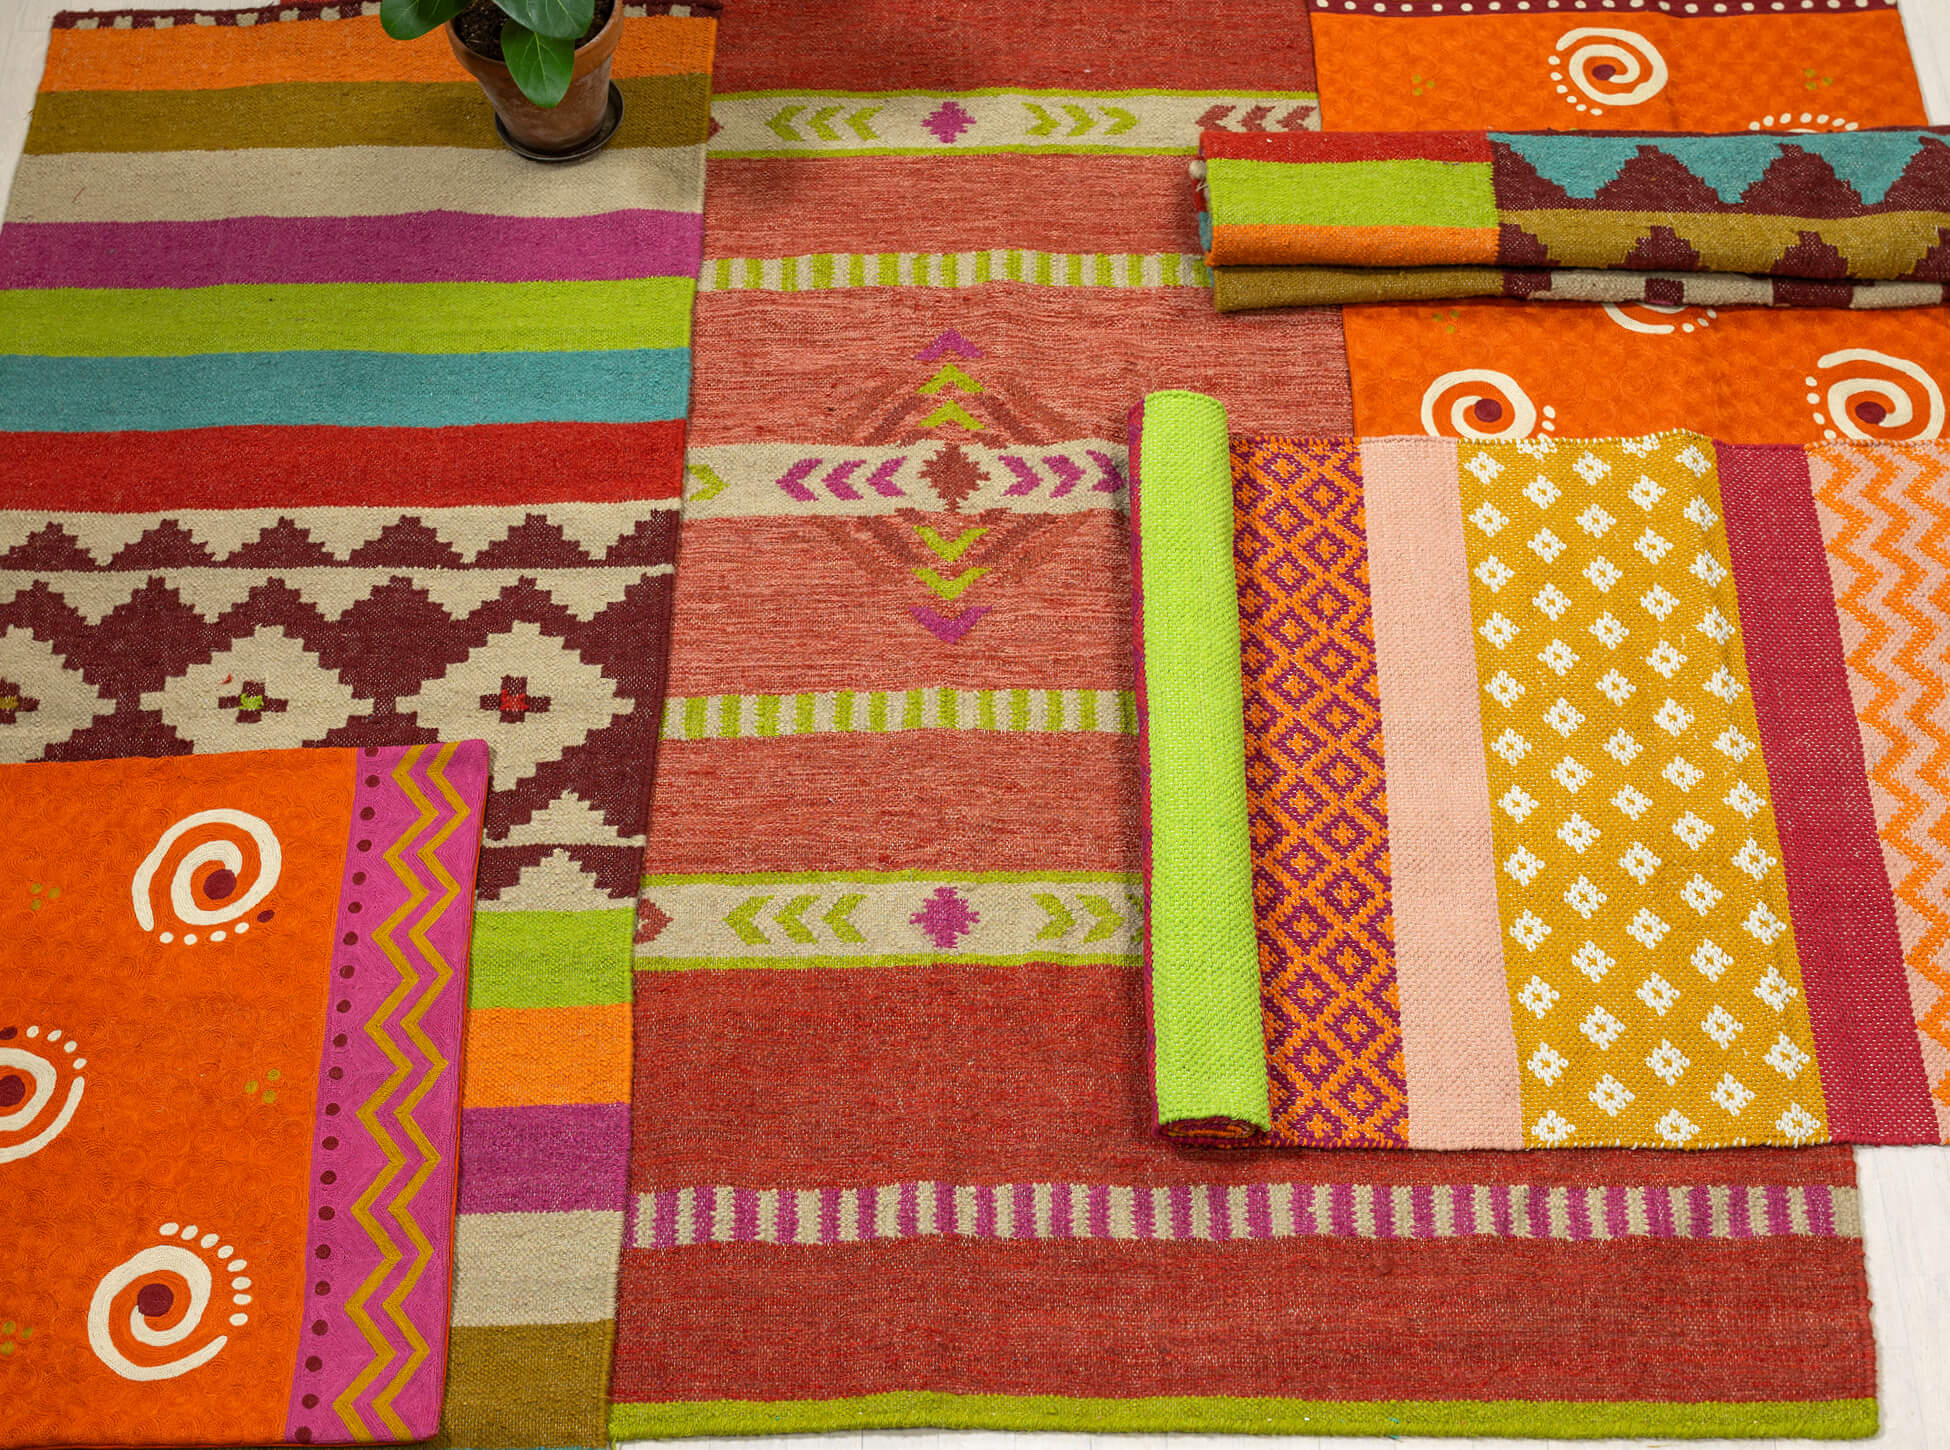 Hand-woven rugs 